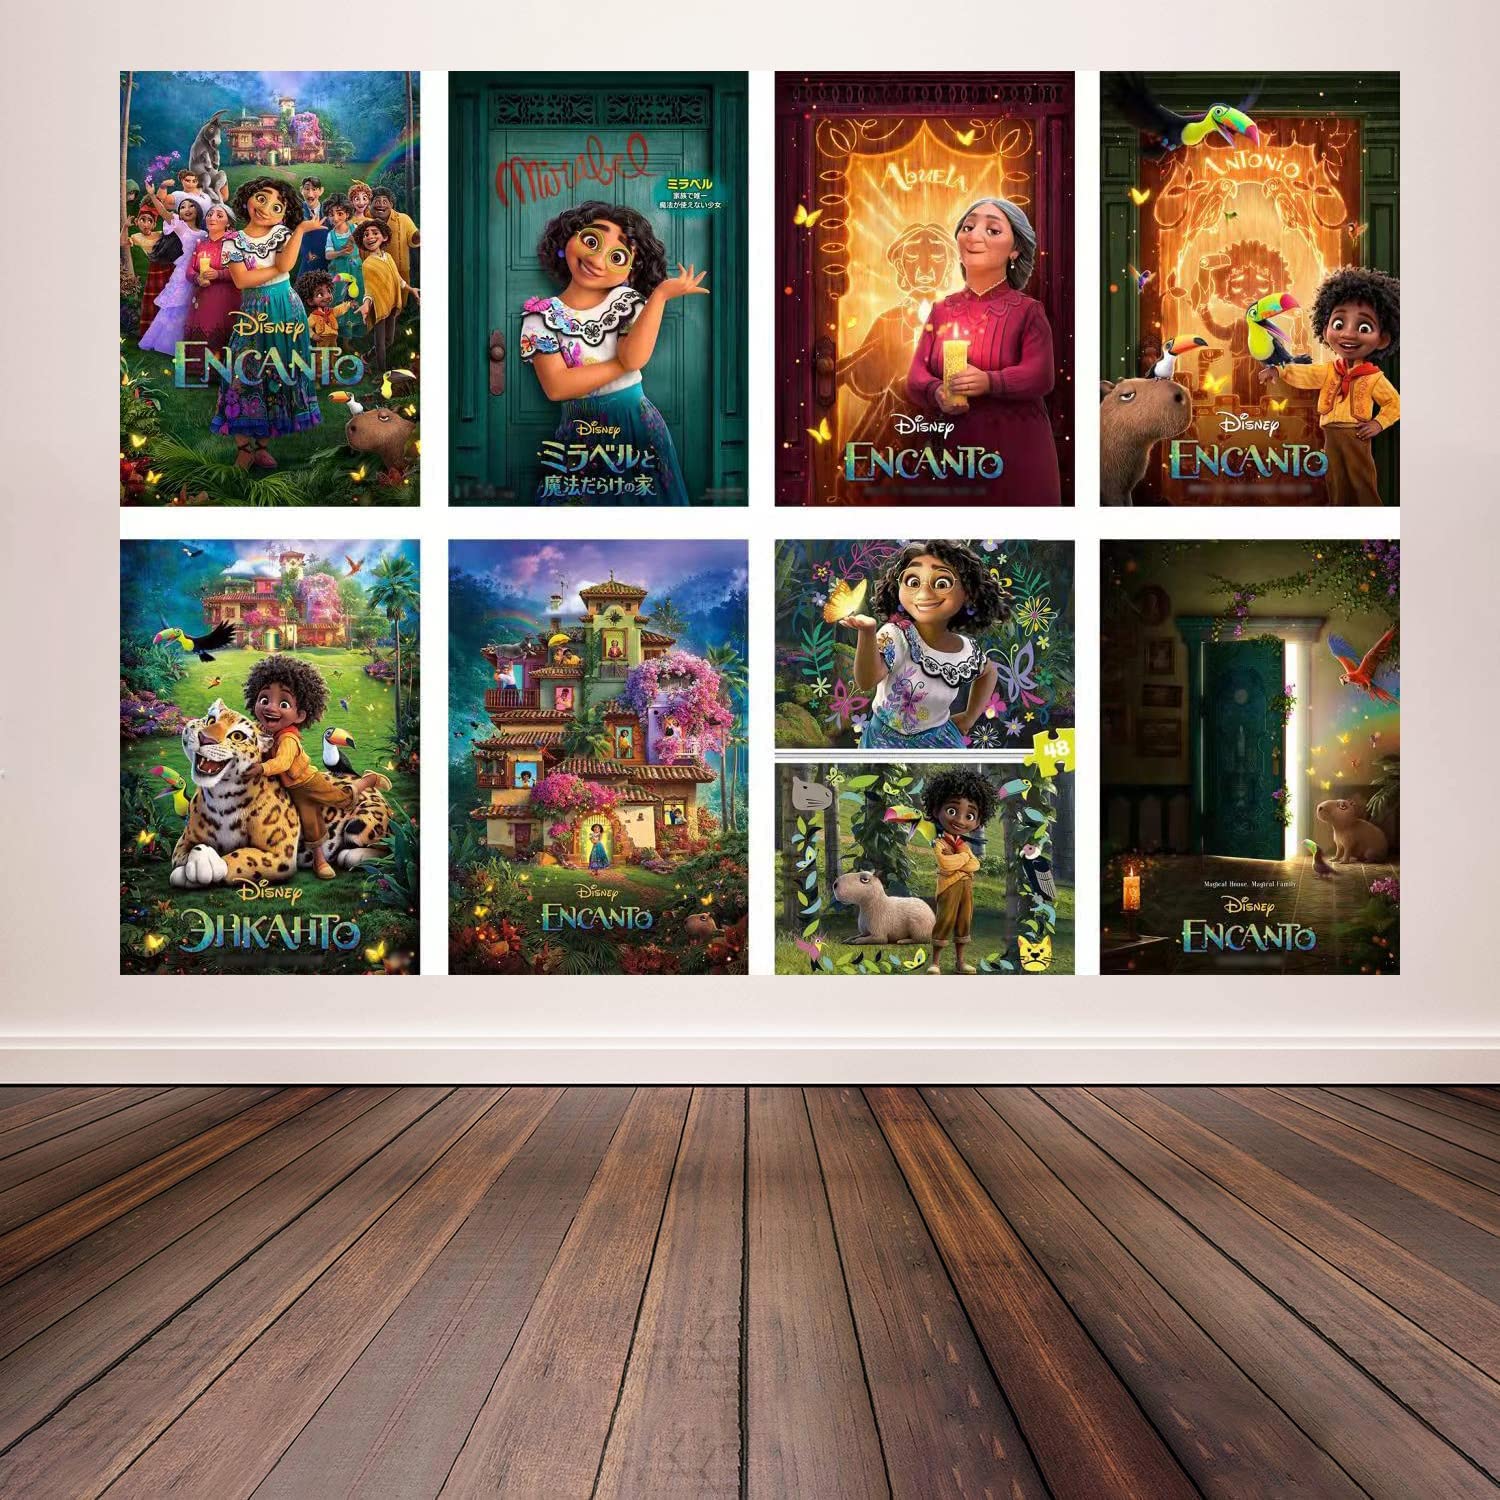 Artistic posters for the movie Encanto 42x29 cm - 8 pieces